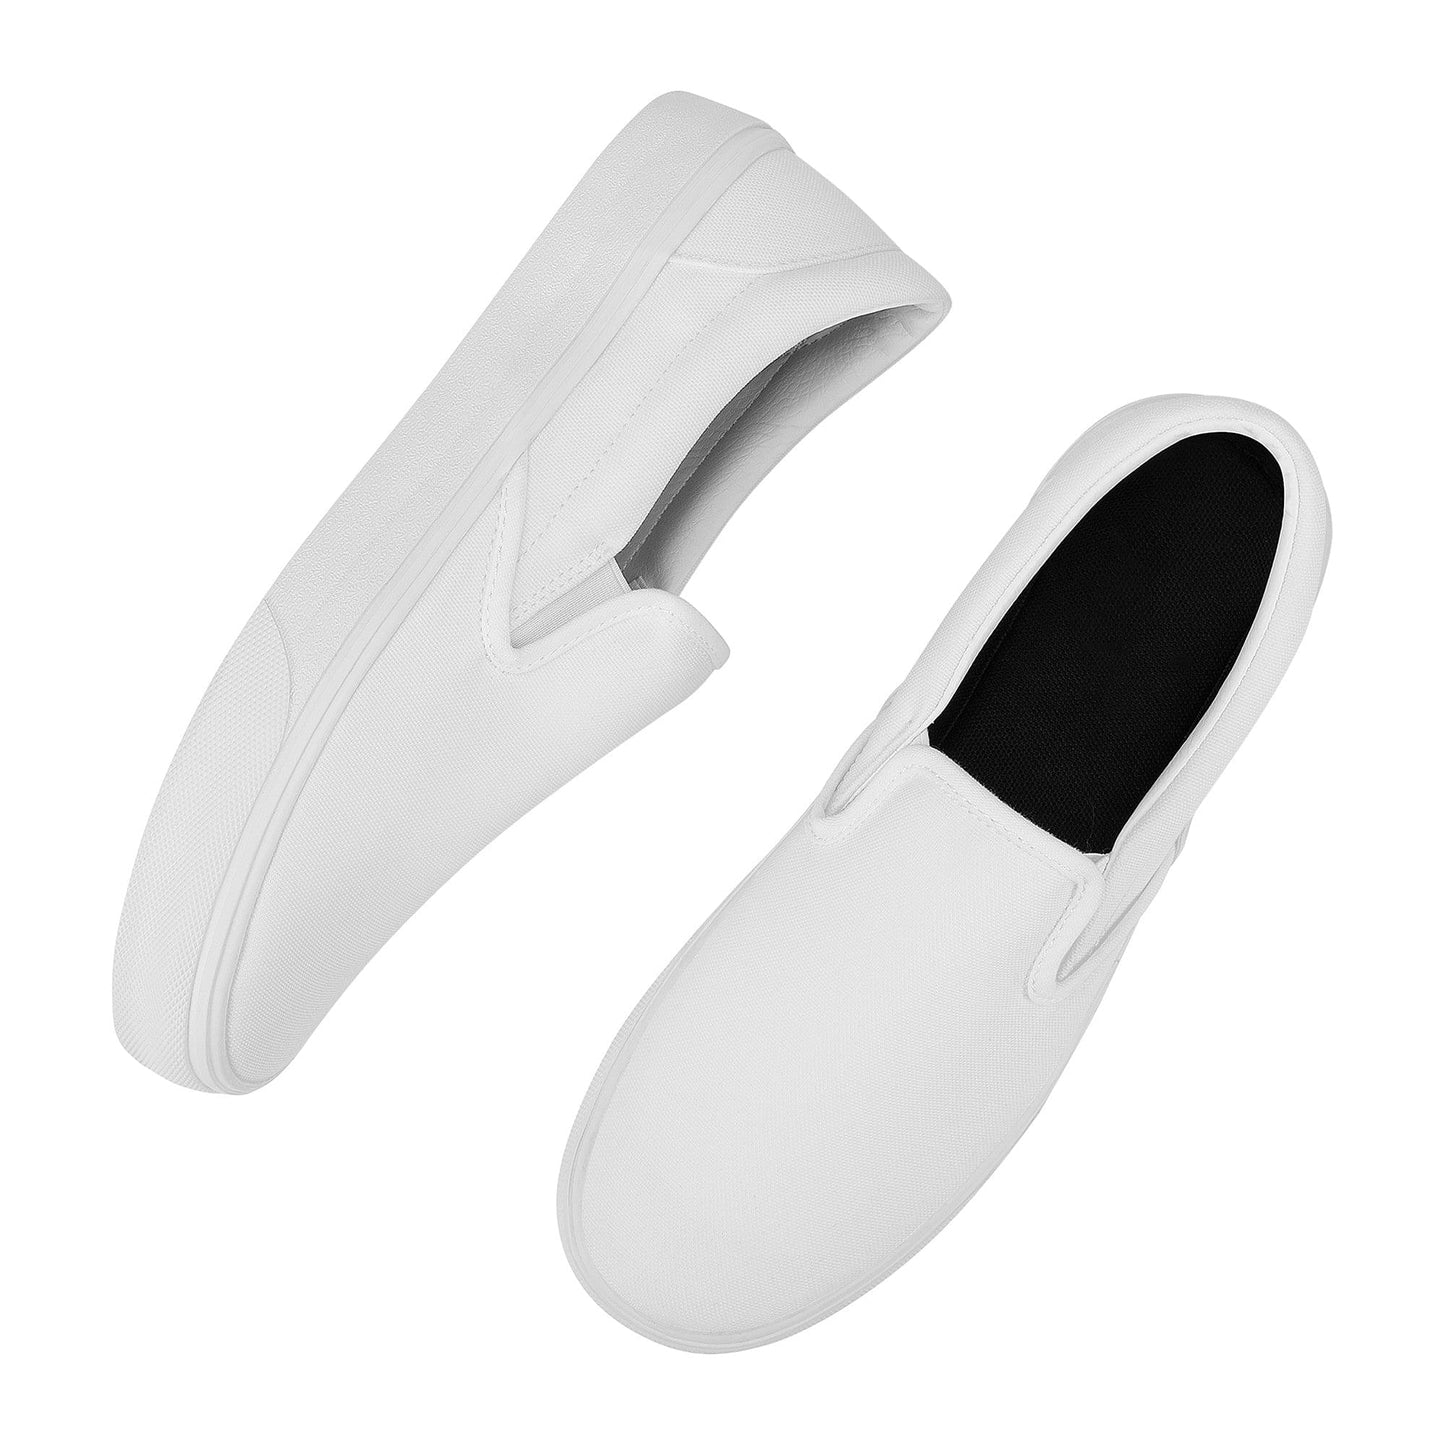 Custom Skate Slip On Shoes -New Style MD Colloid Colors 